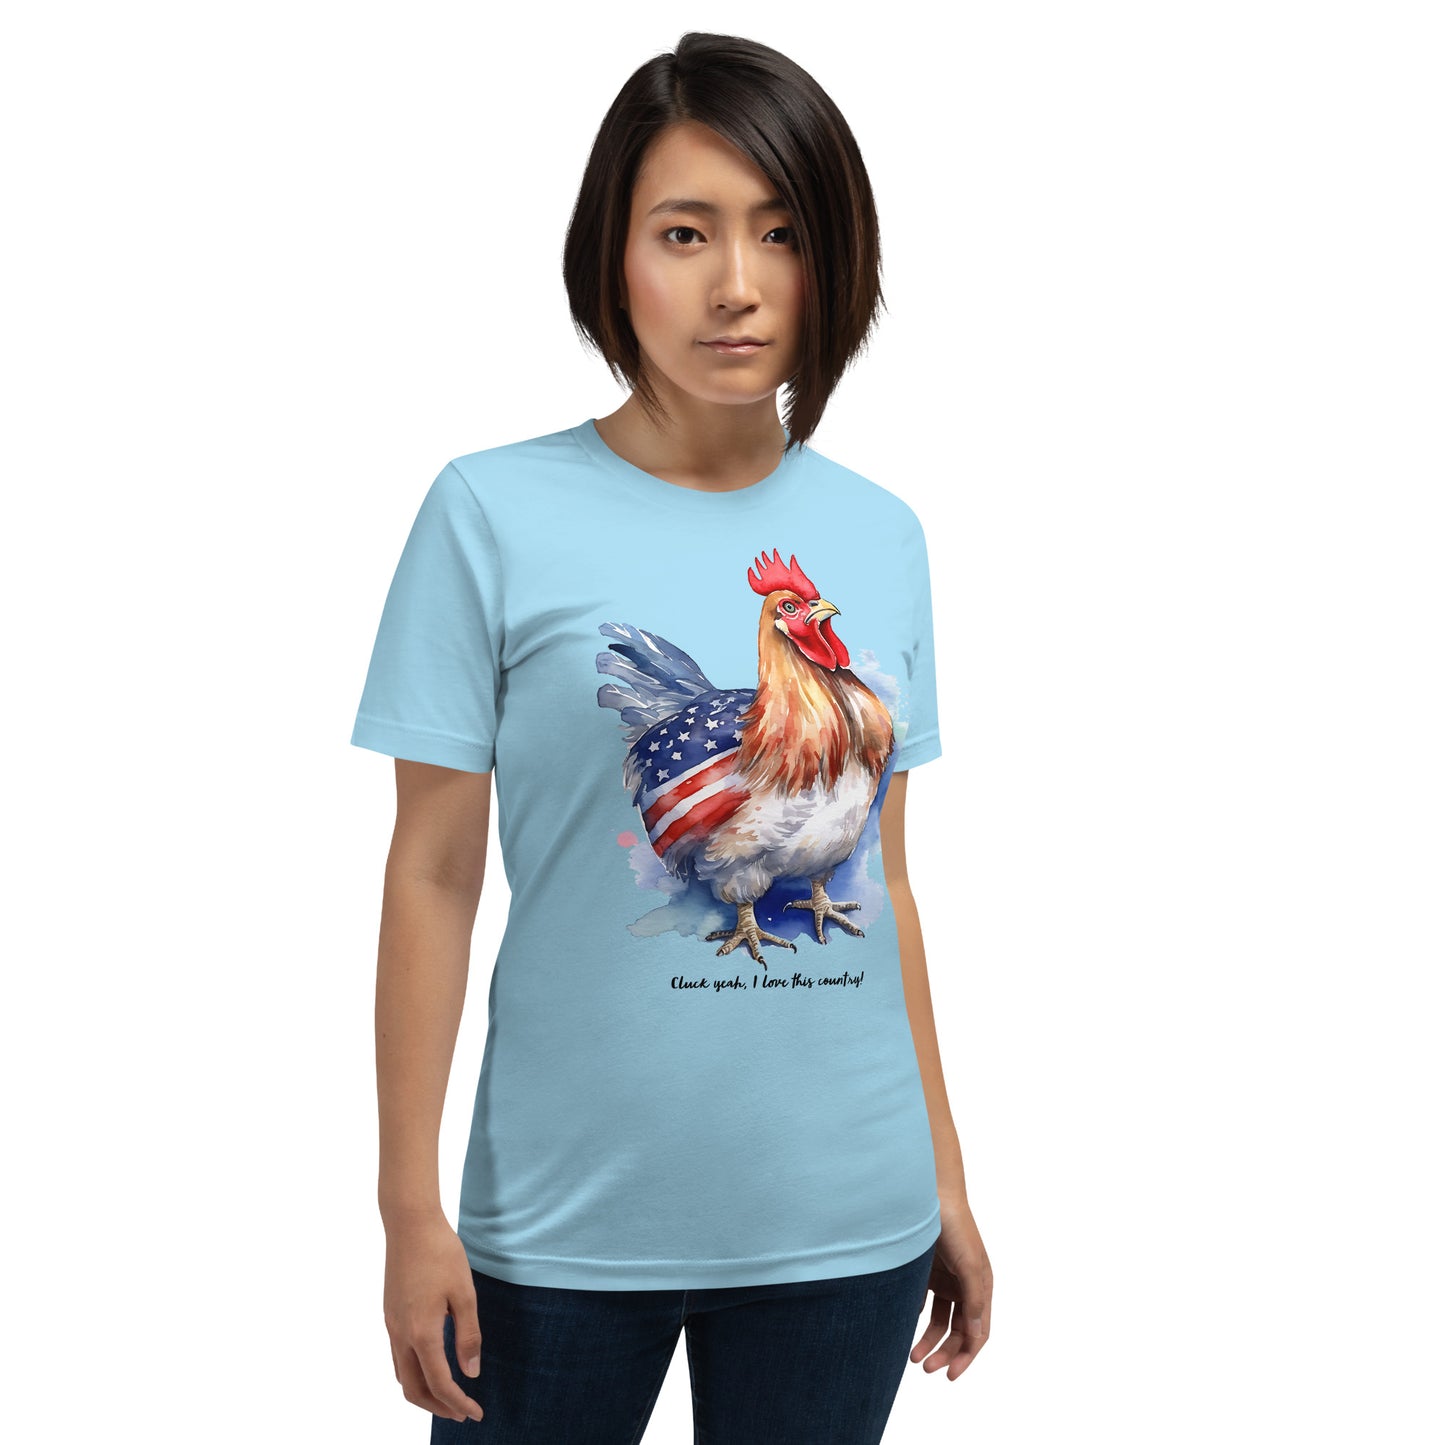 USA Themed Patriotic Chicken Tshirt / Perfect Gift For Chicken Owners / Blue Color